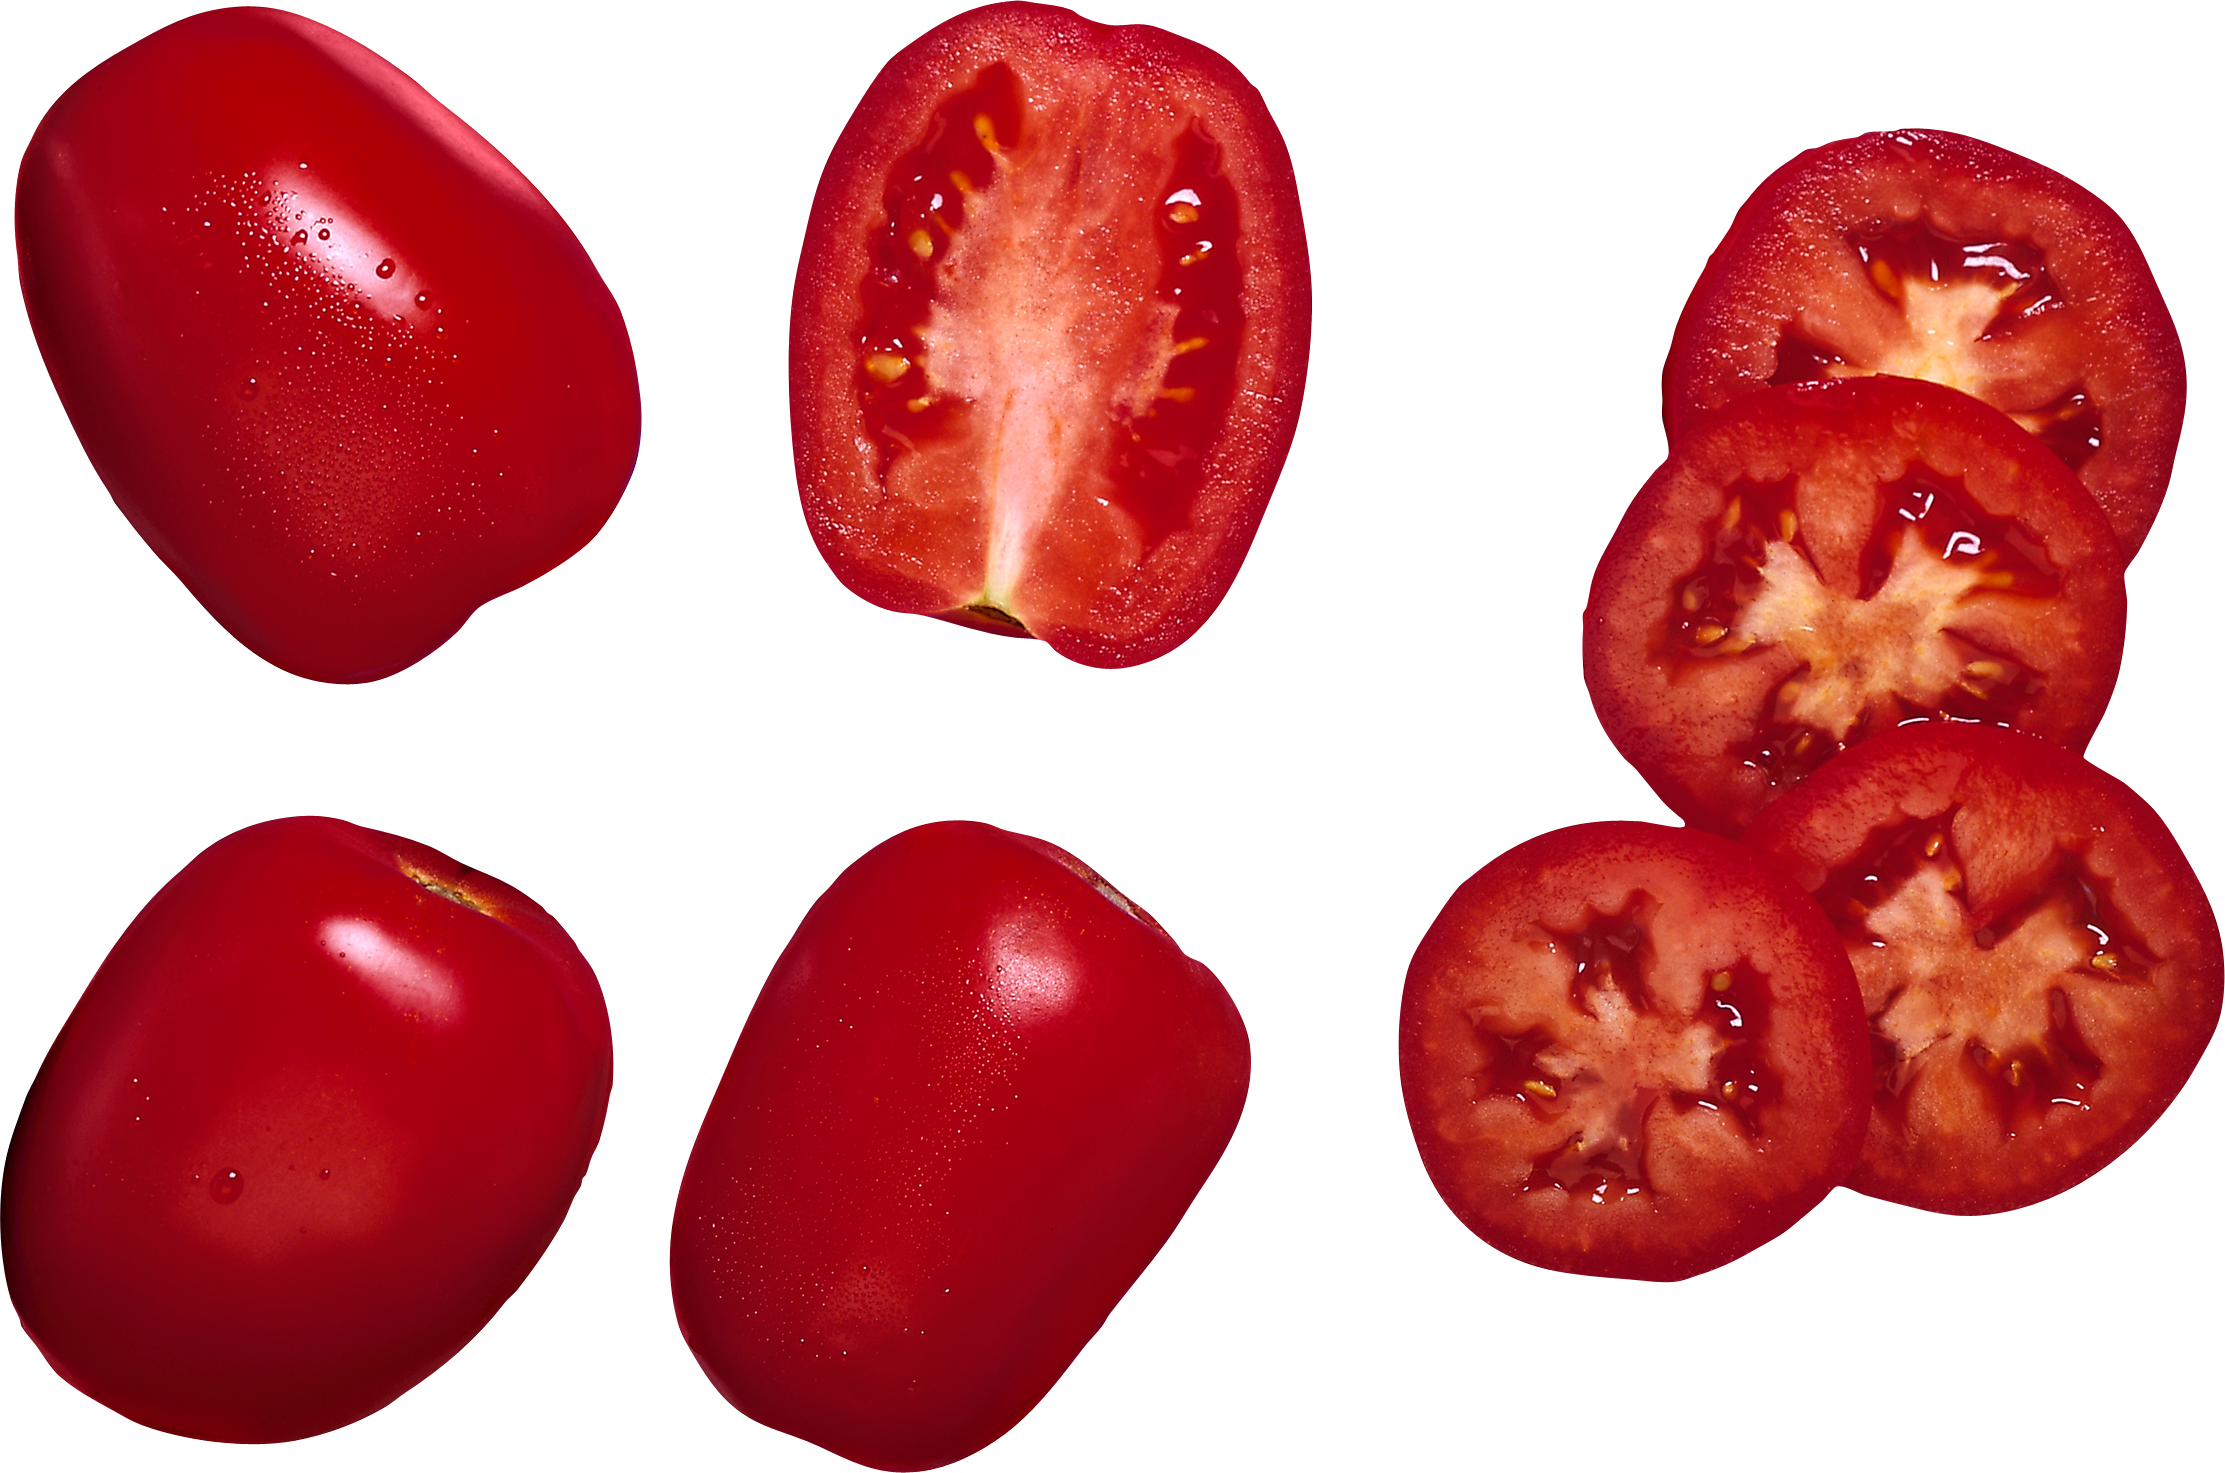 Tomato PNG images Download